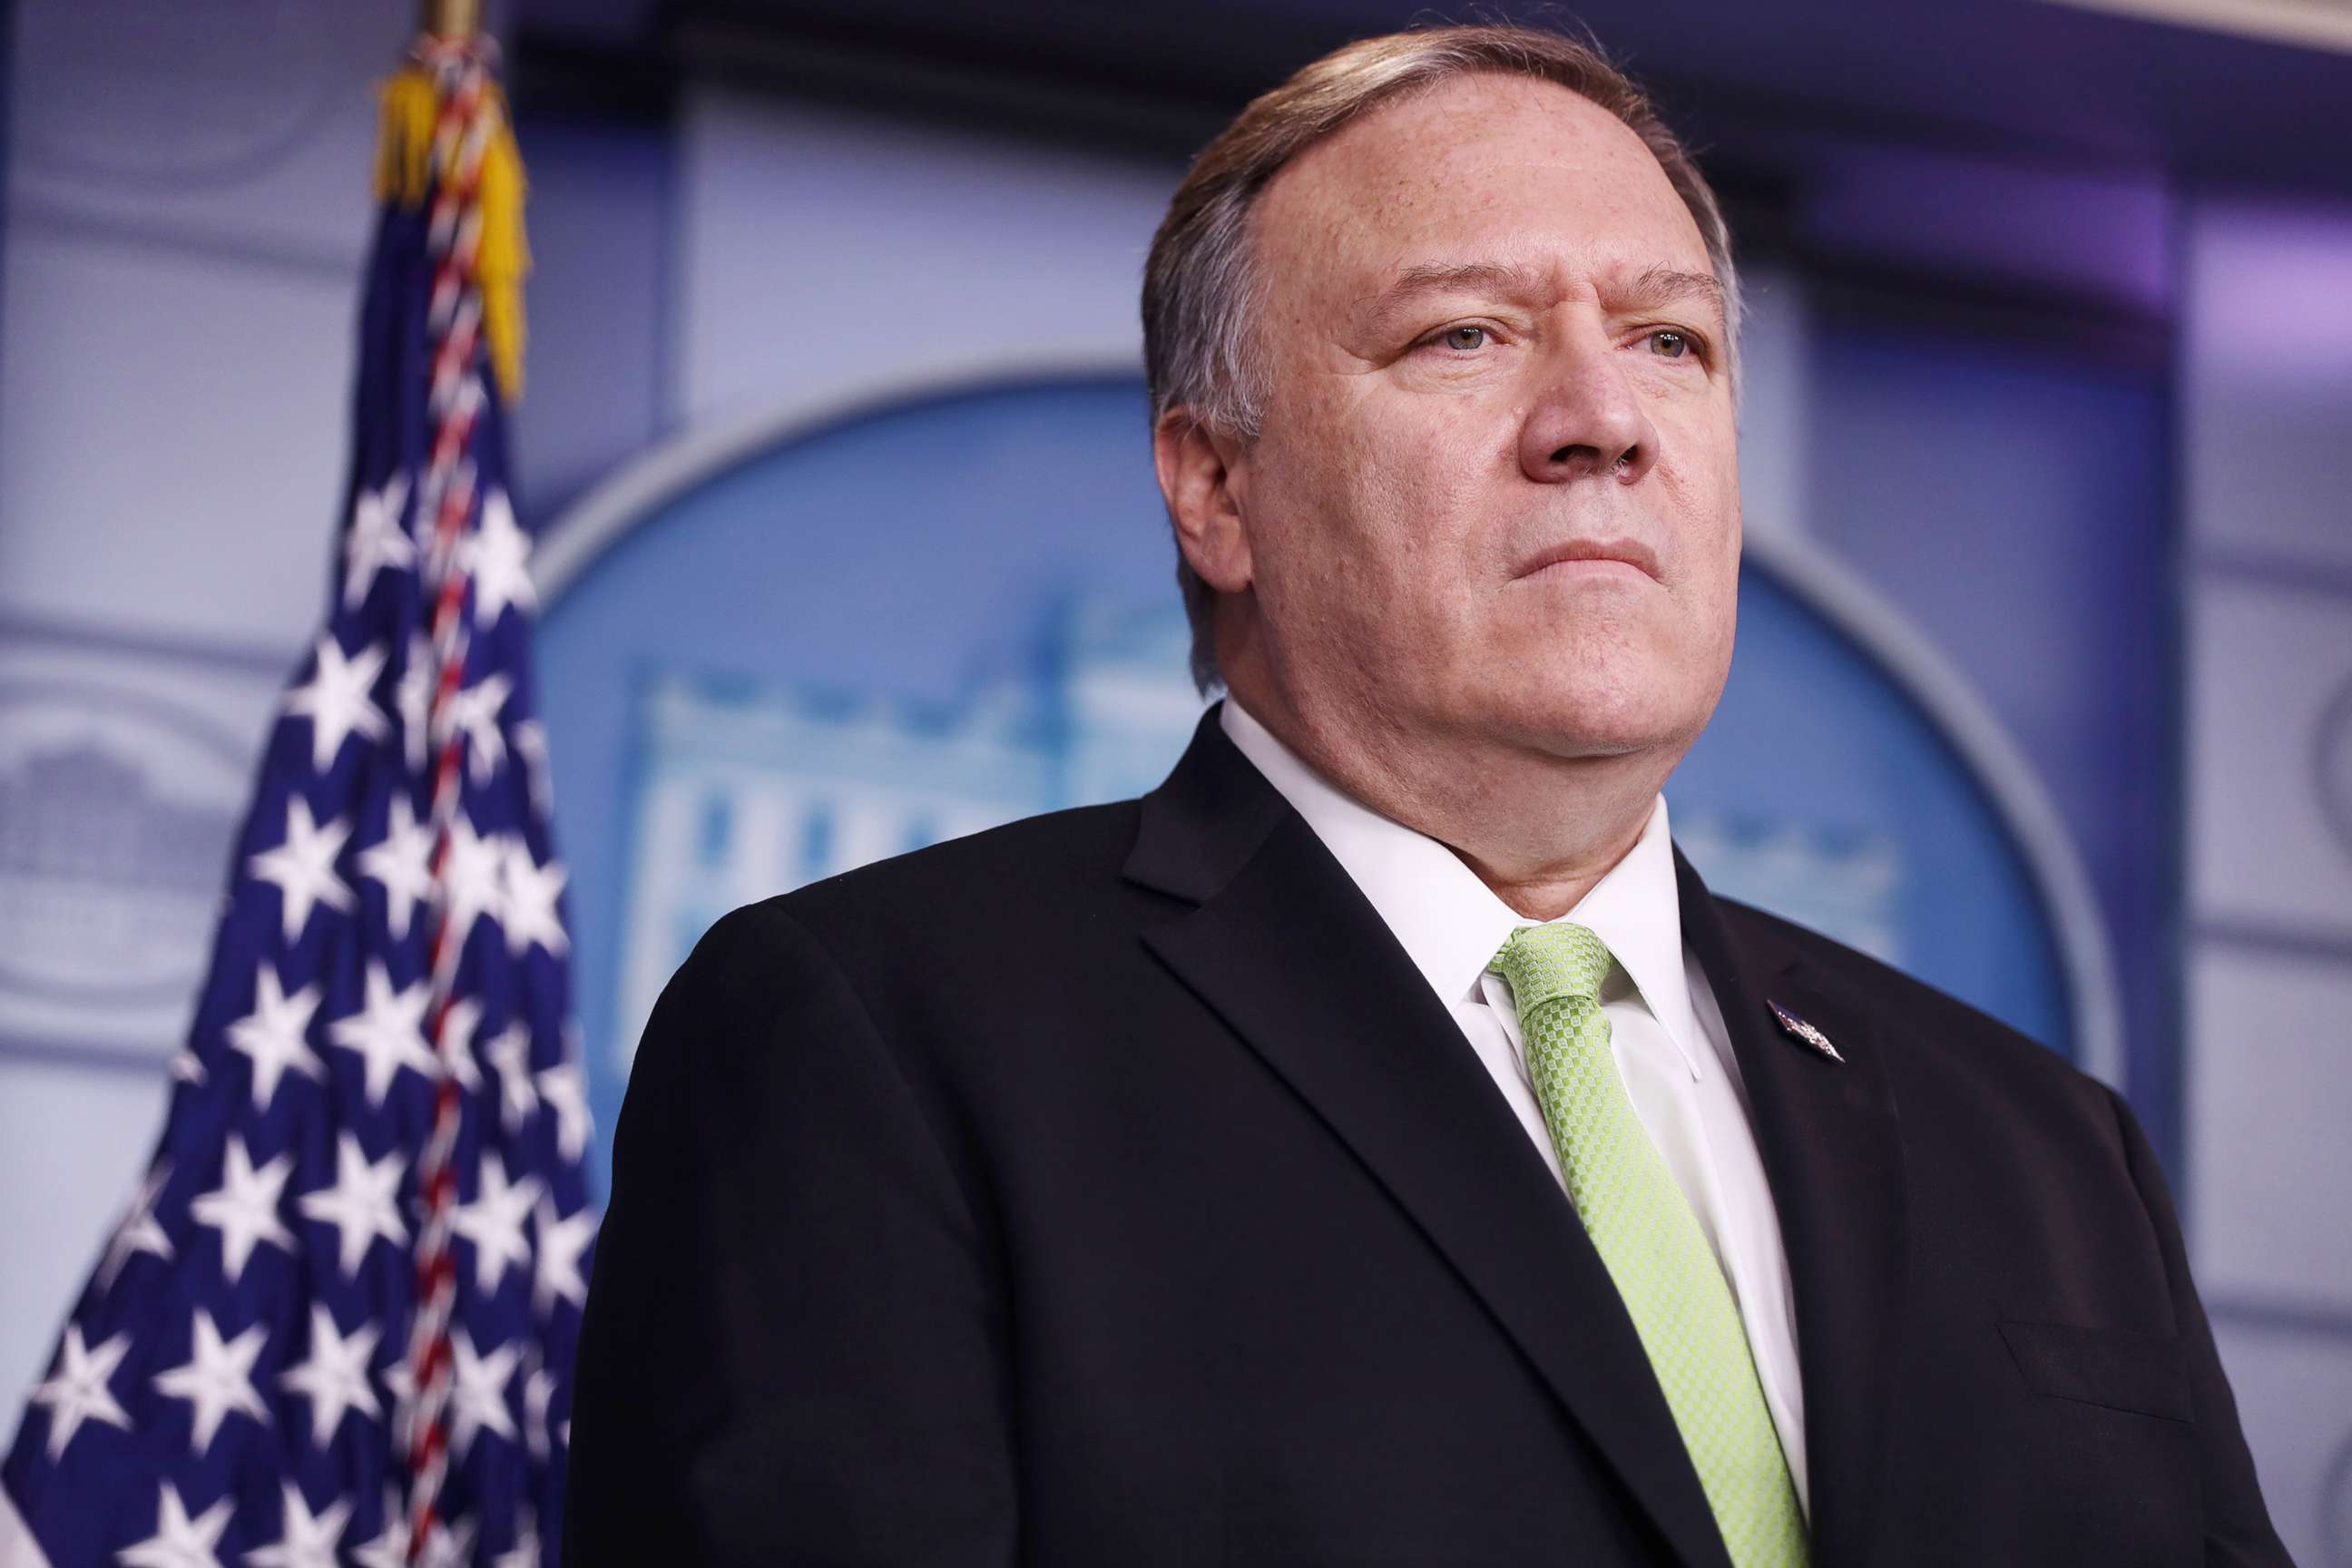 PHOTO: Secretary of State Mike Pompeo participates in a press briefing in the James S. Brady Press Briefing Room of the White House Jan. 10, 2020 in Washington, D.C.